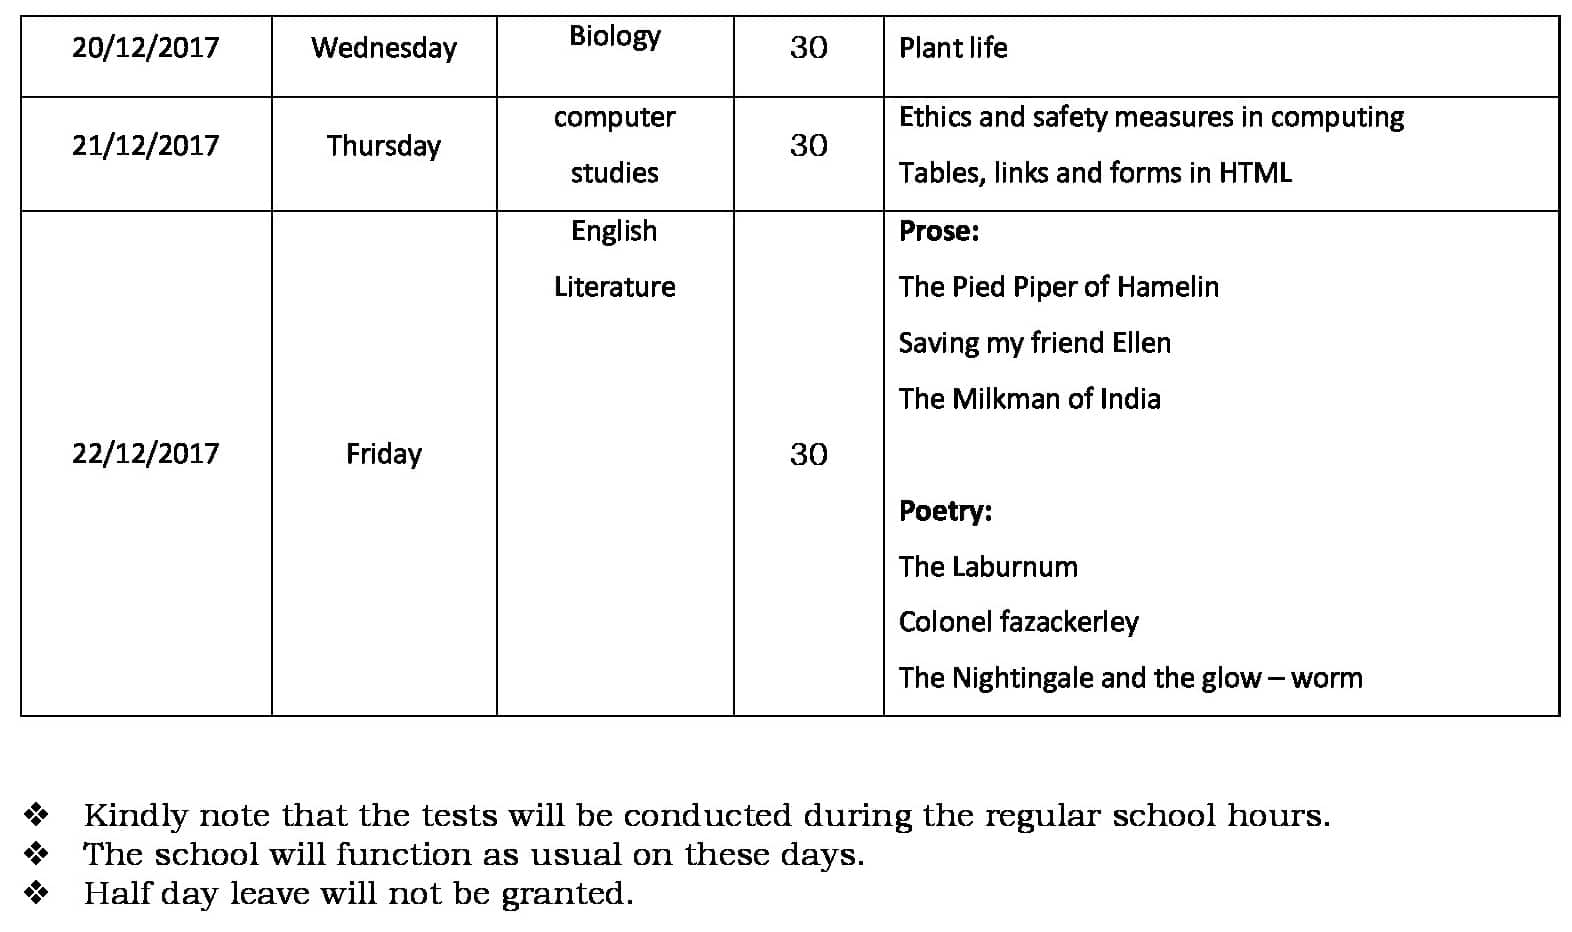 FA 2 Portion and Schedule